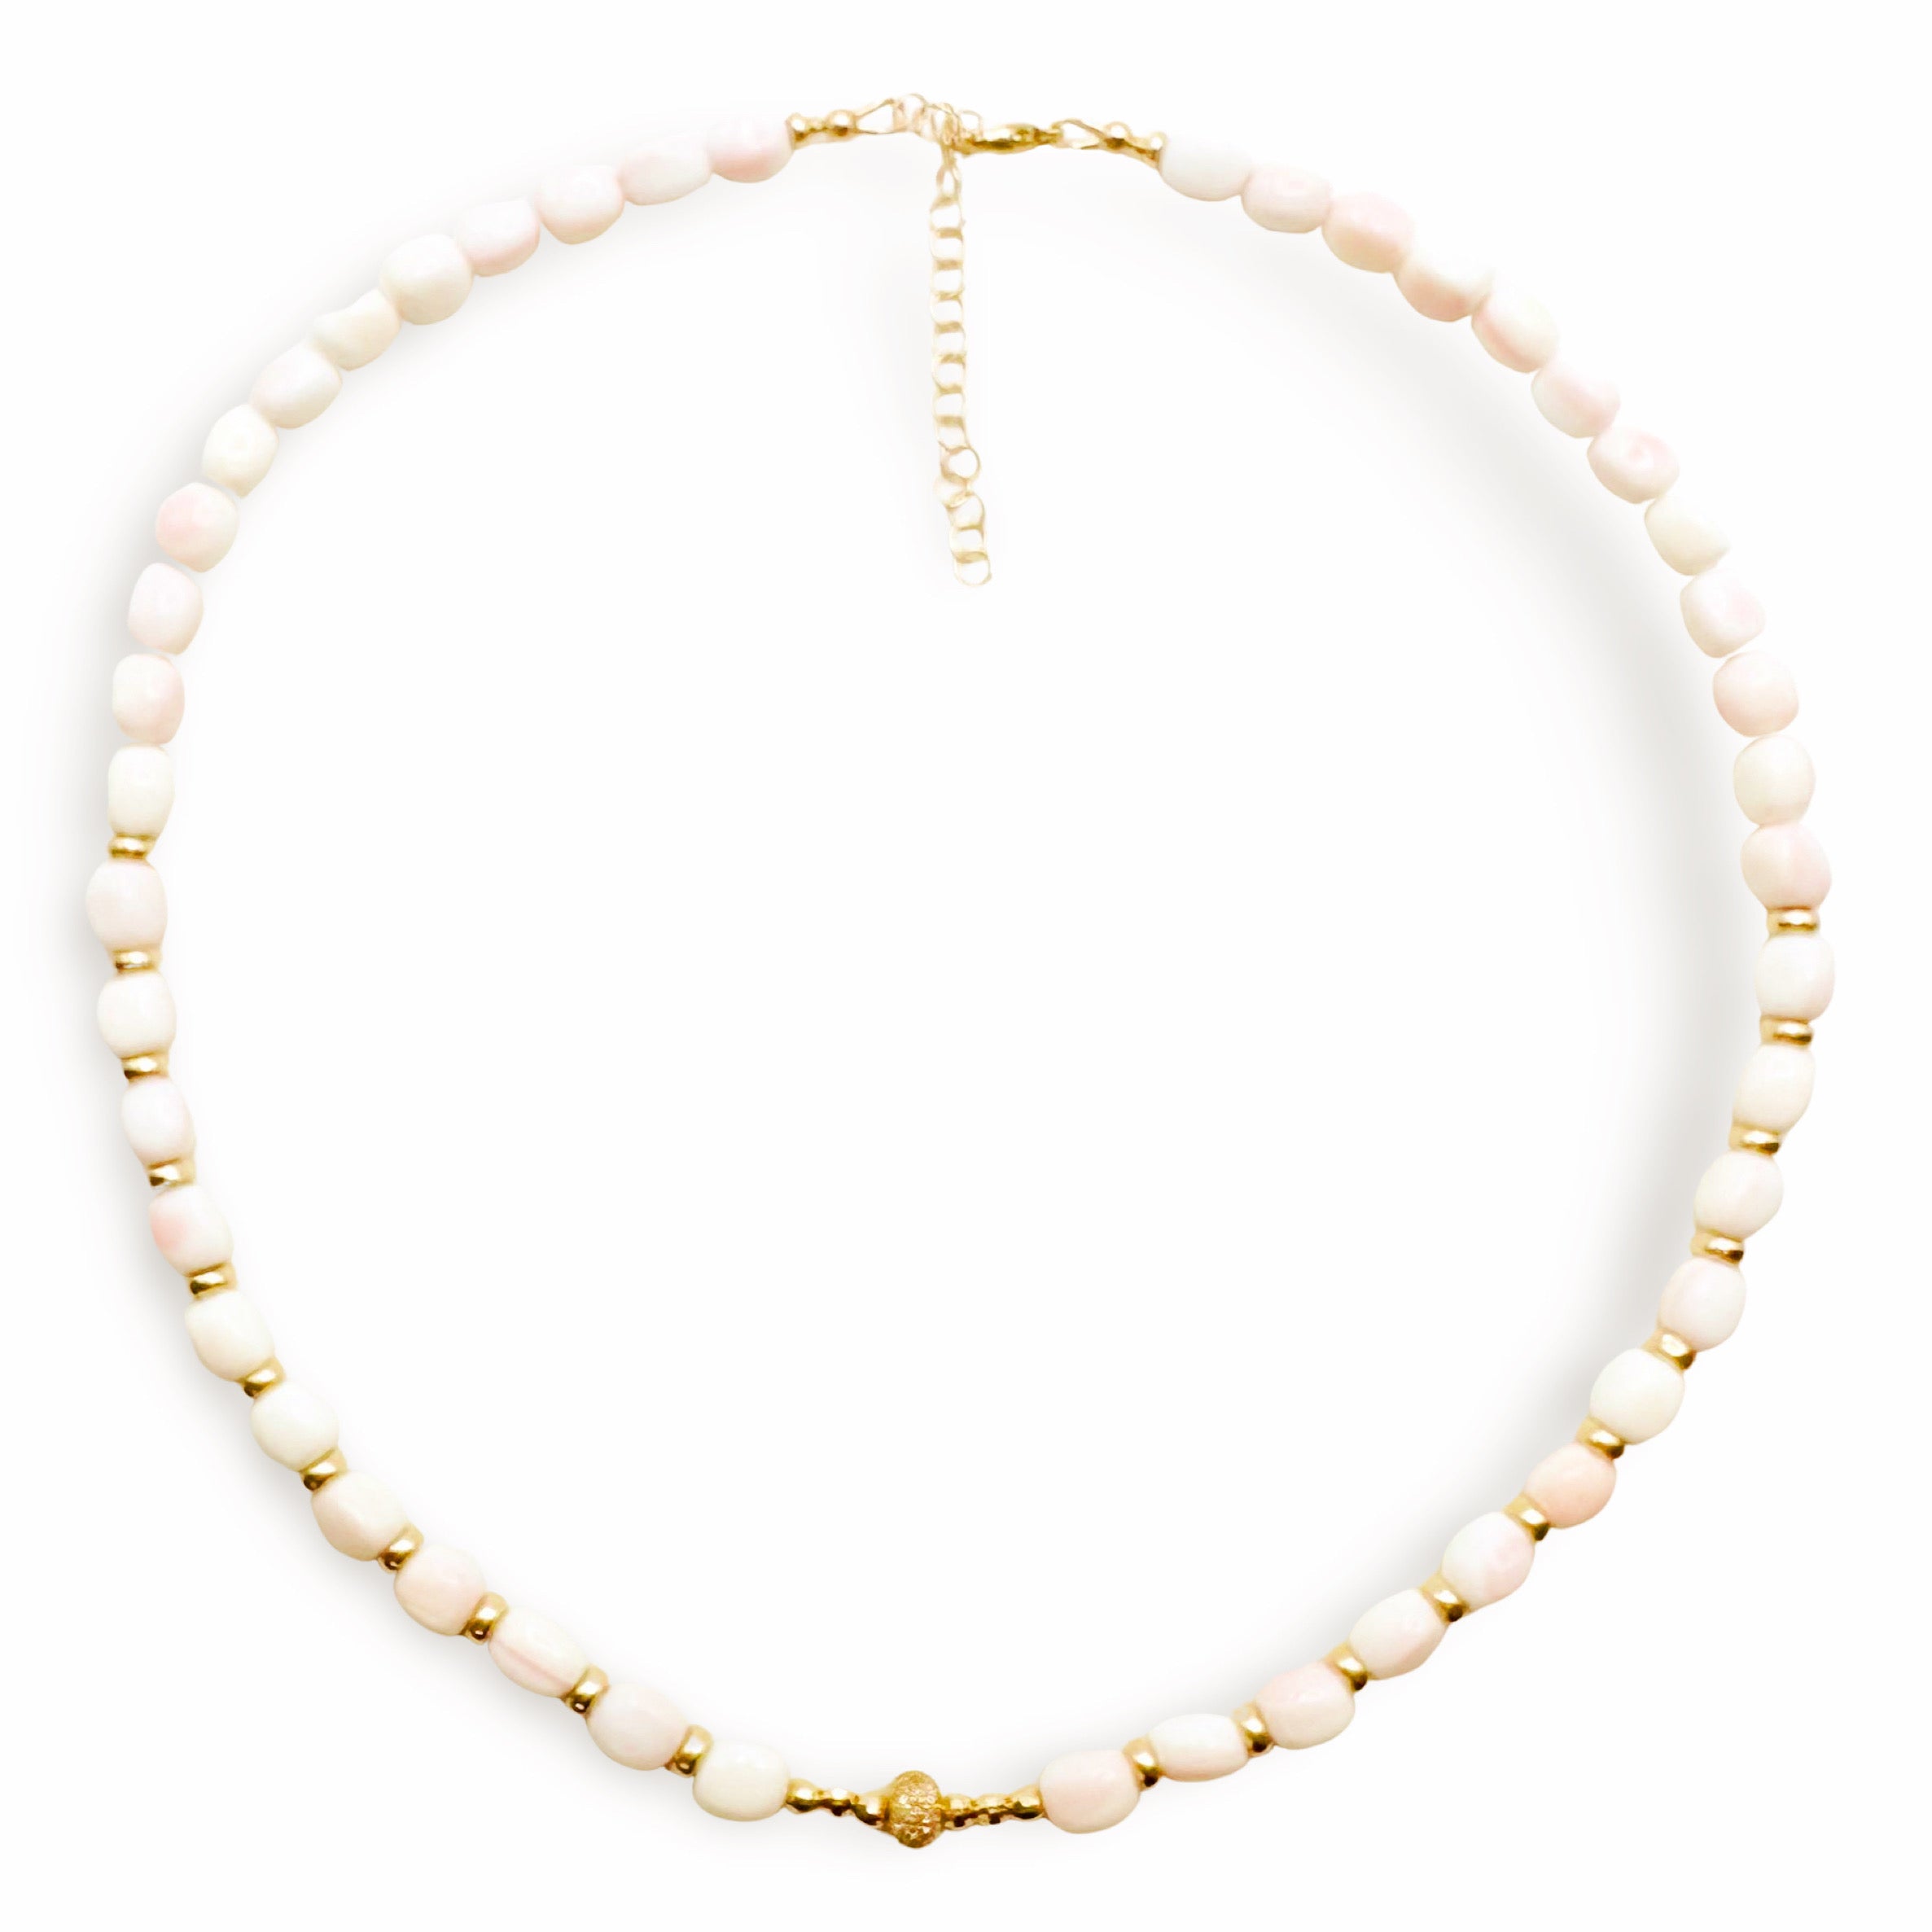 PINK SHELL NECKLACES